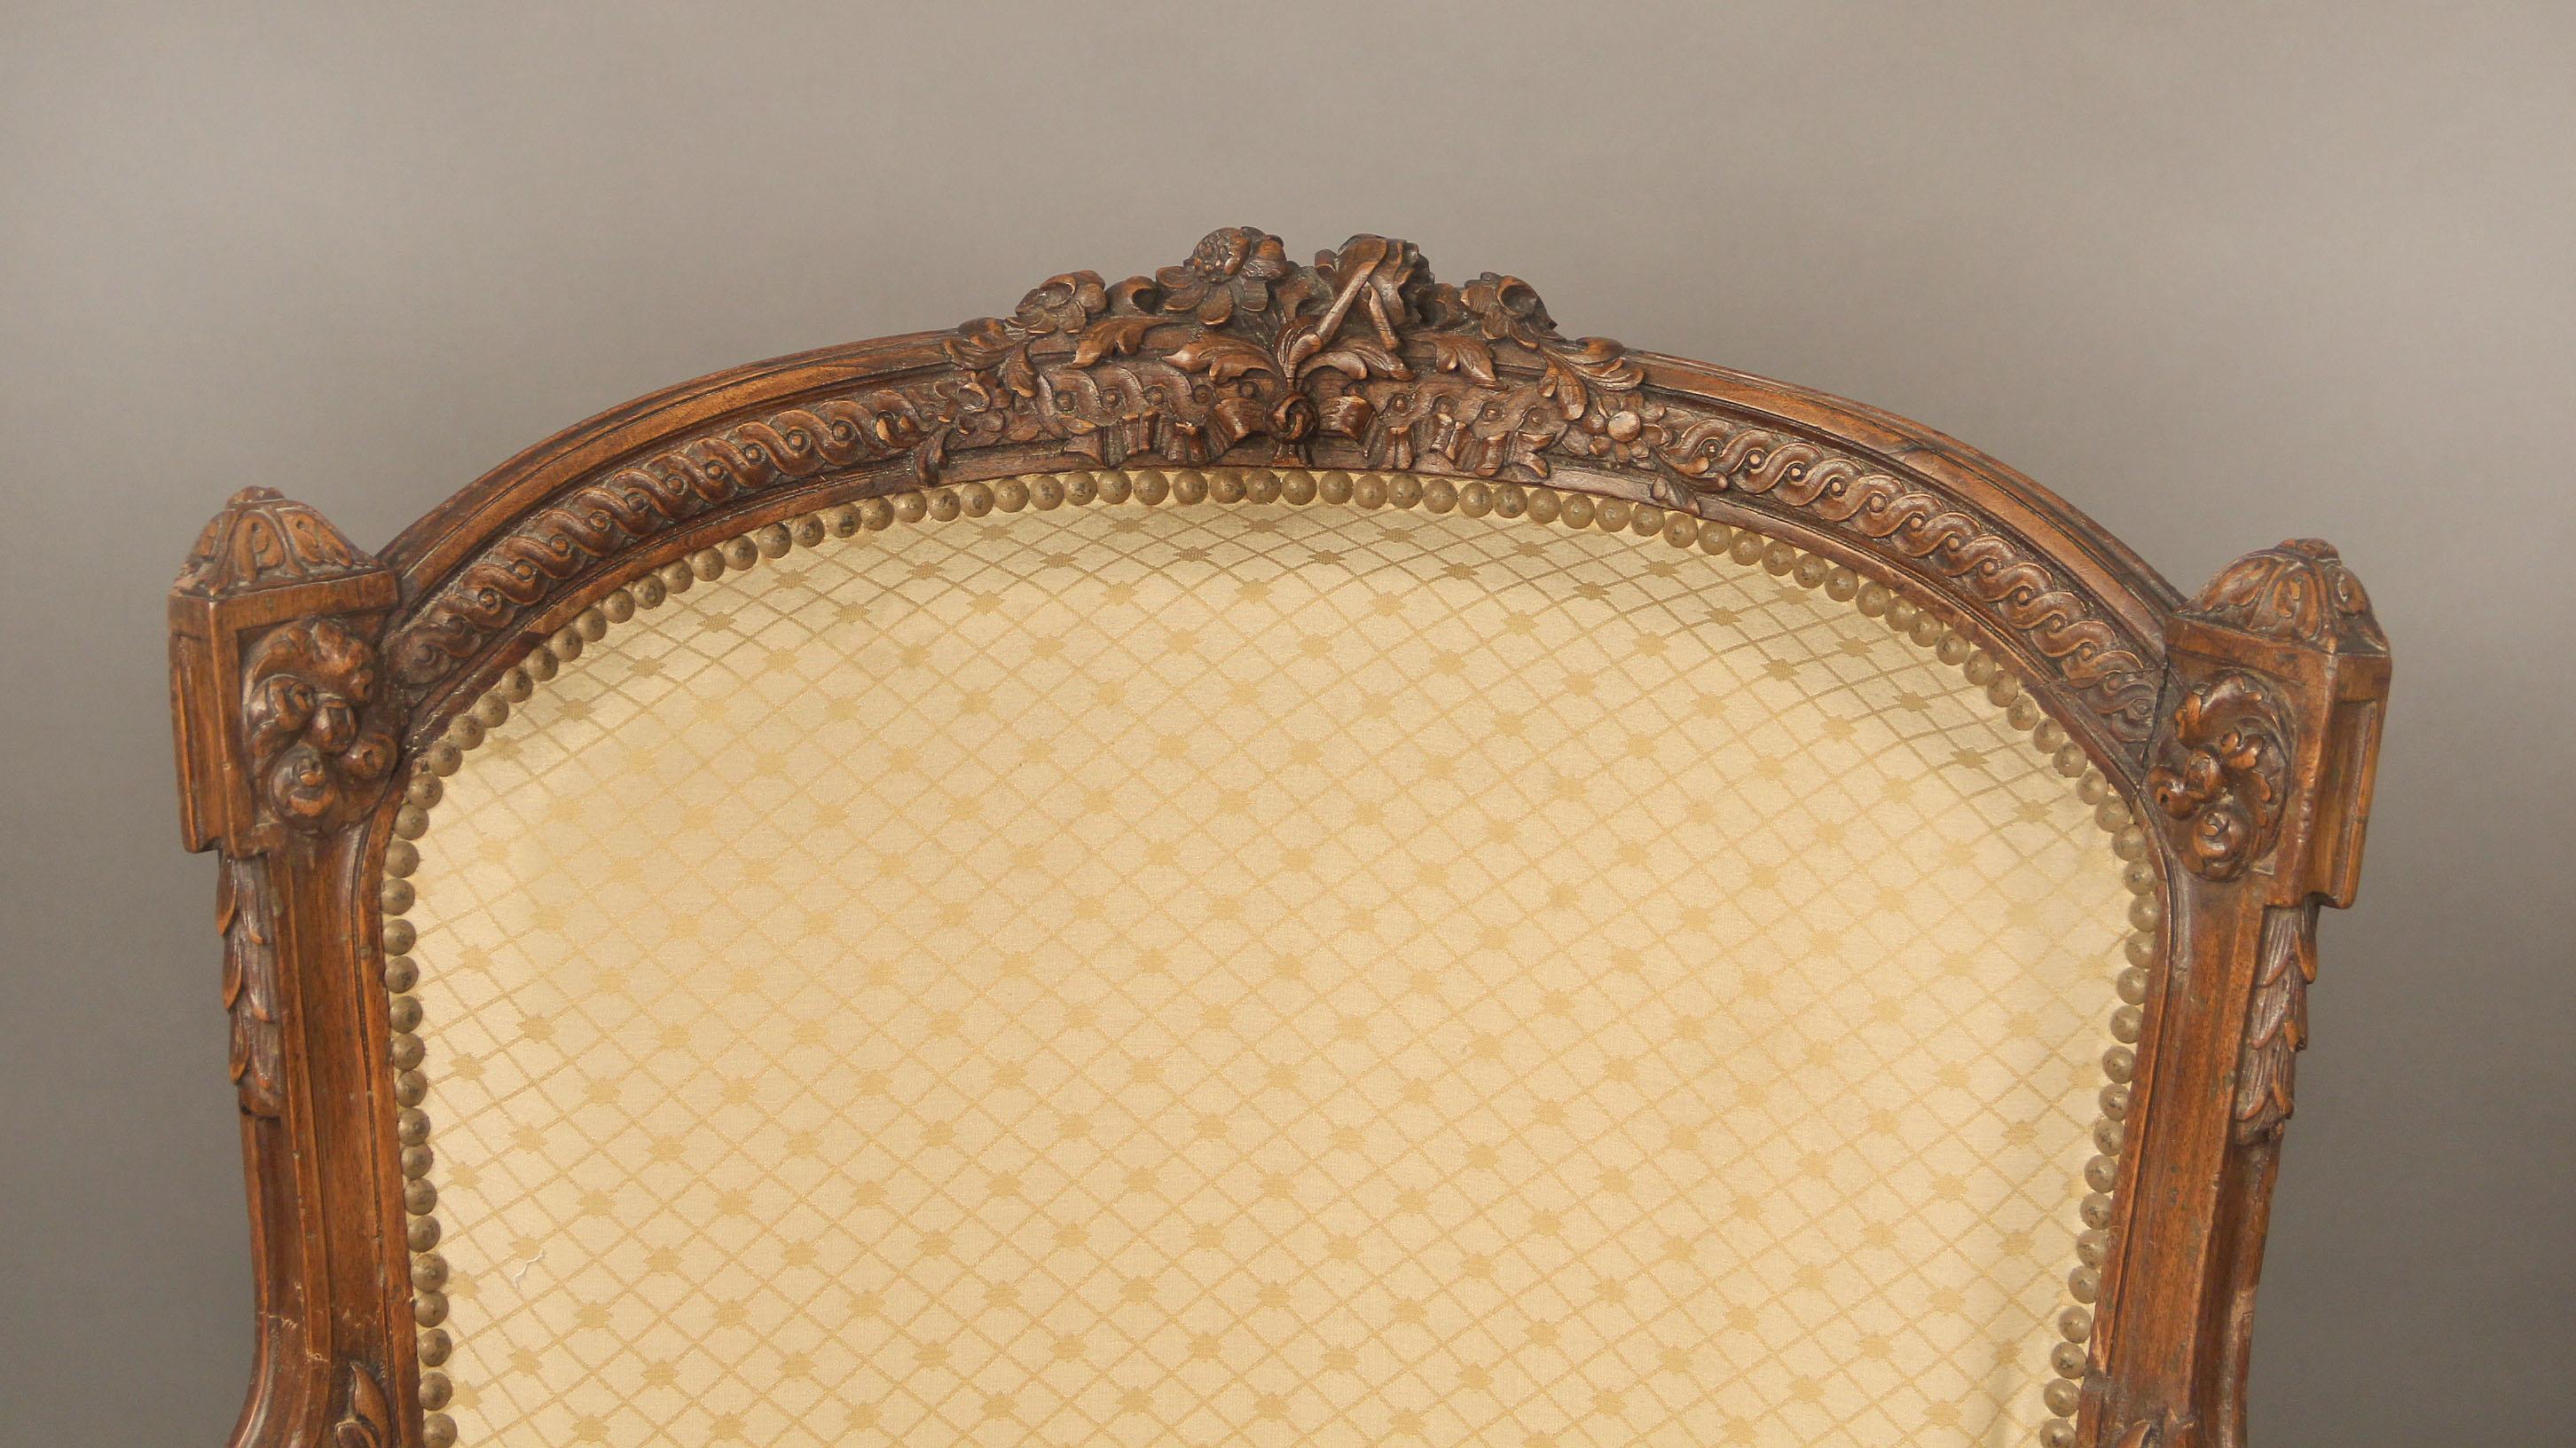 A fine late 19th century Louis XV style carved wood bergère

High back and wide seat with hand carved floral designed frame.